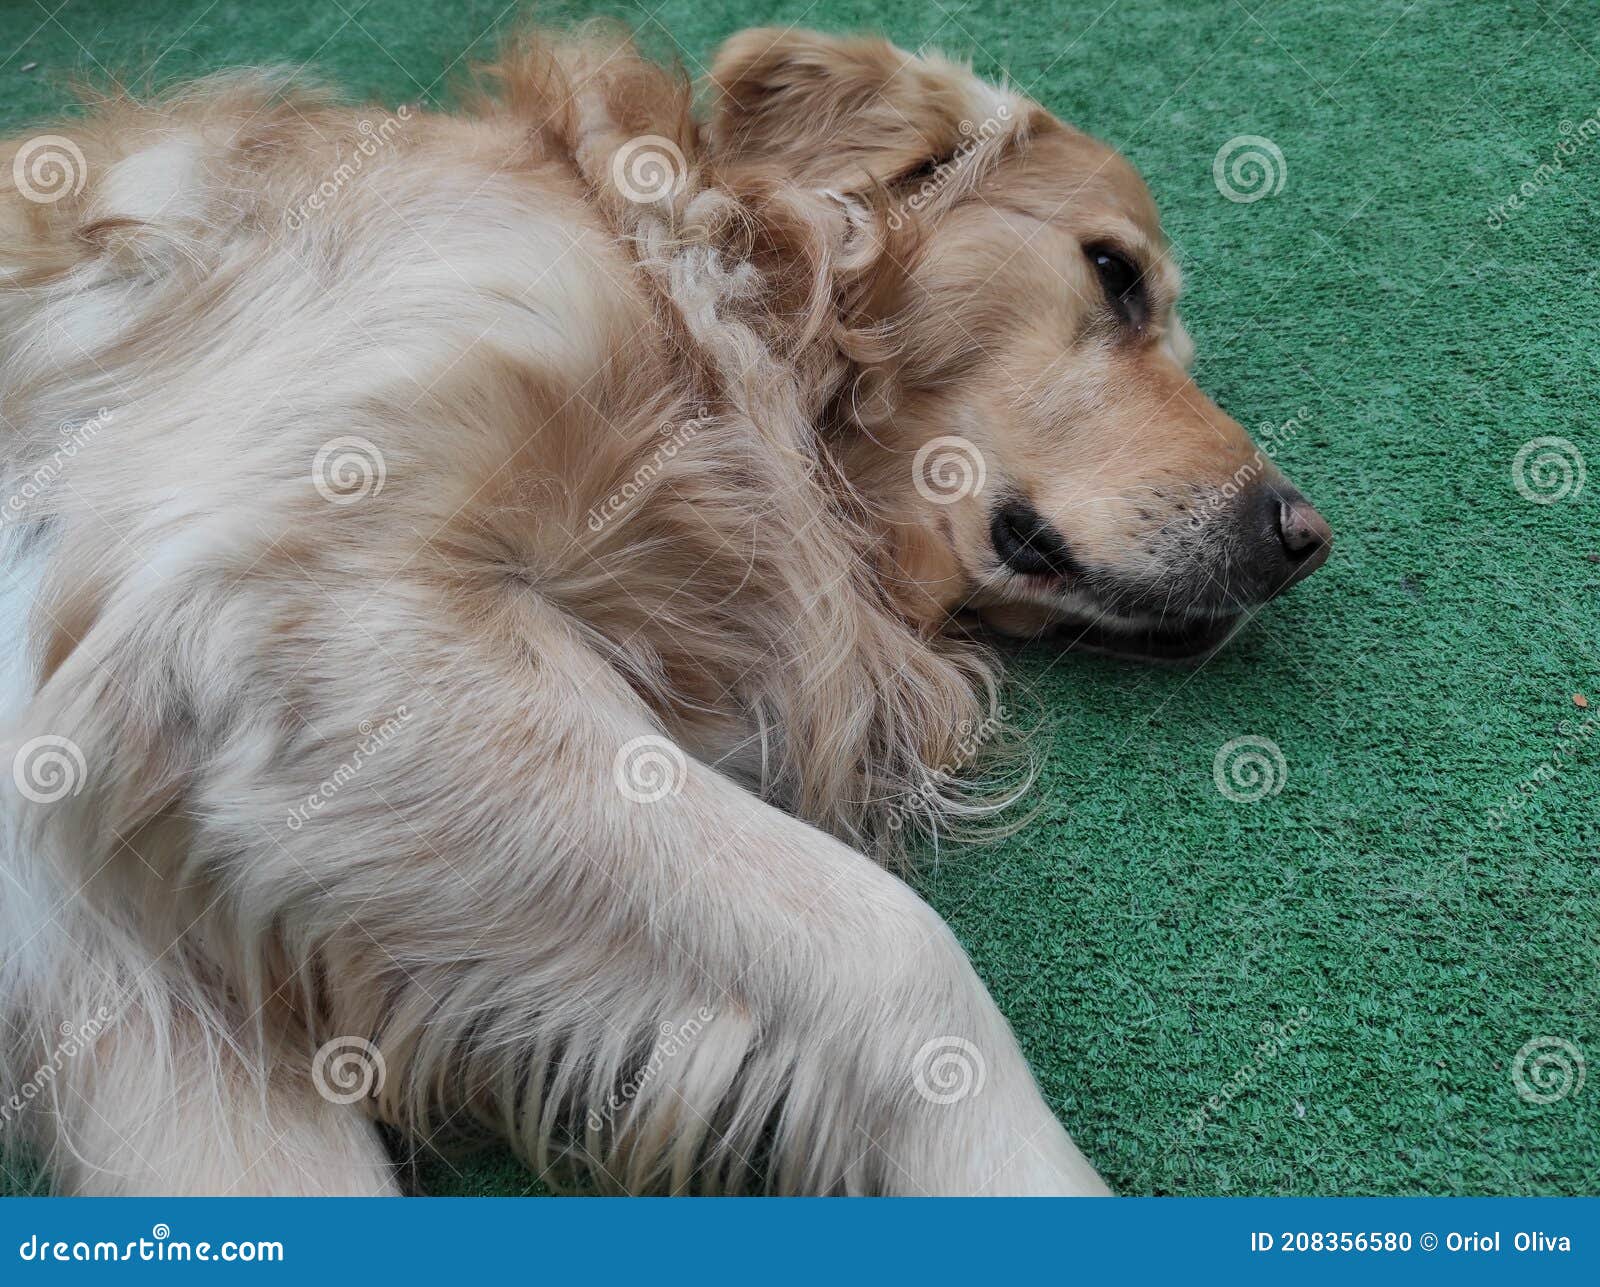 stretched out golden retriever dog resting on artificial grass floor